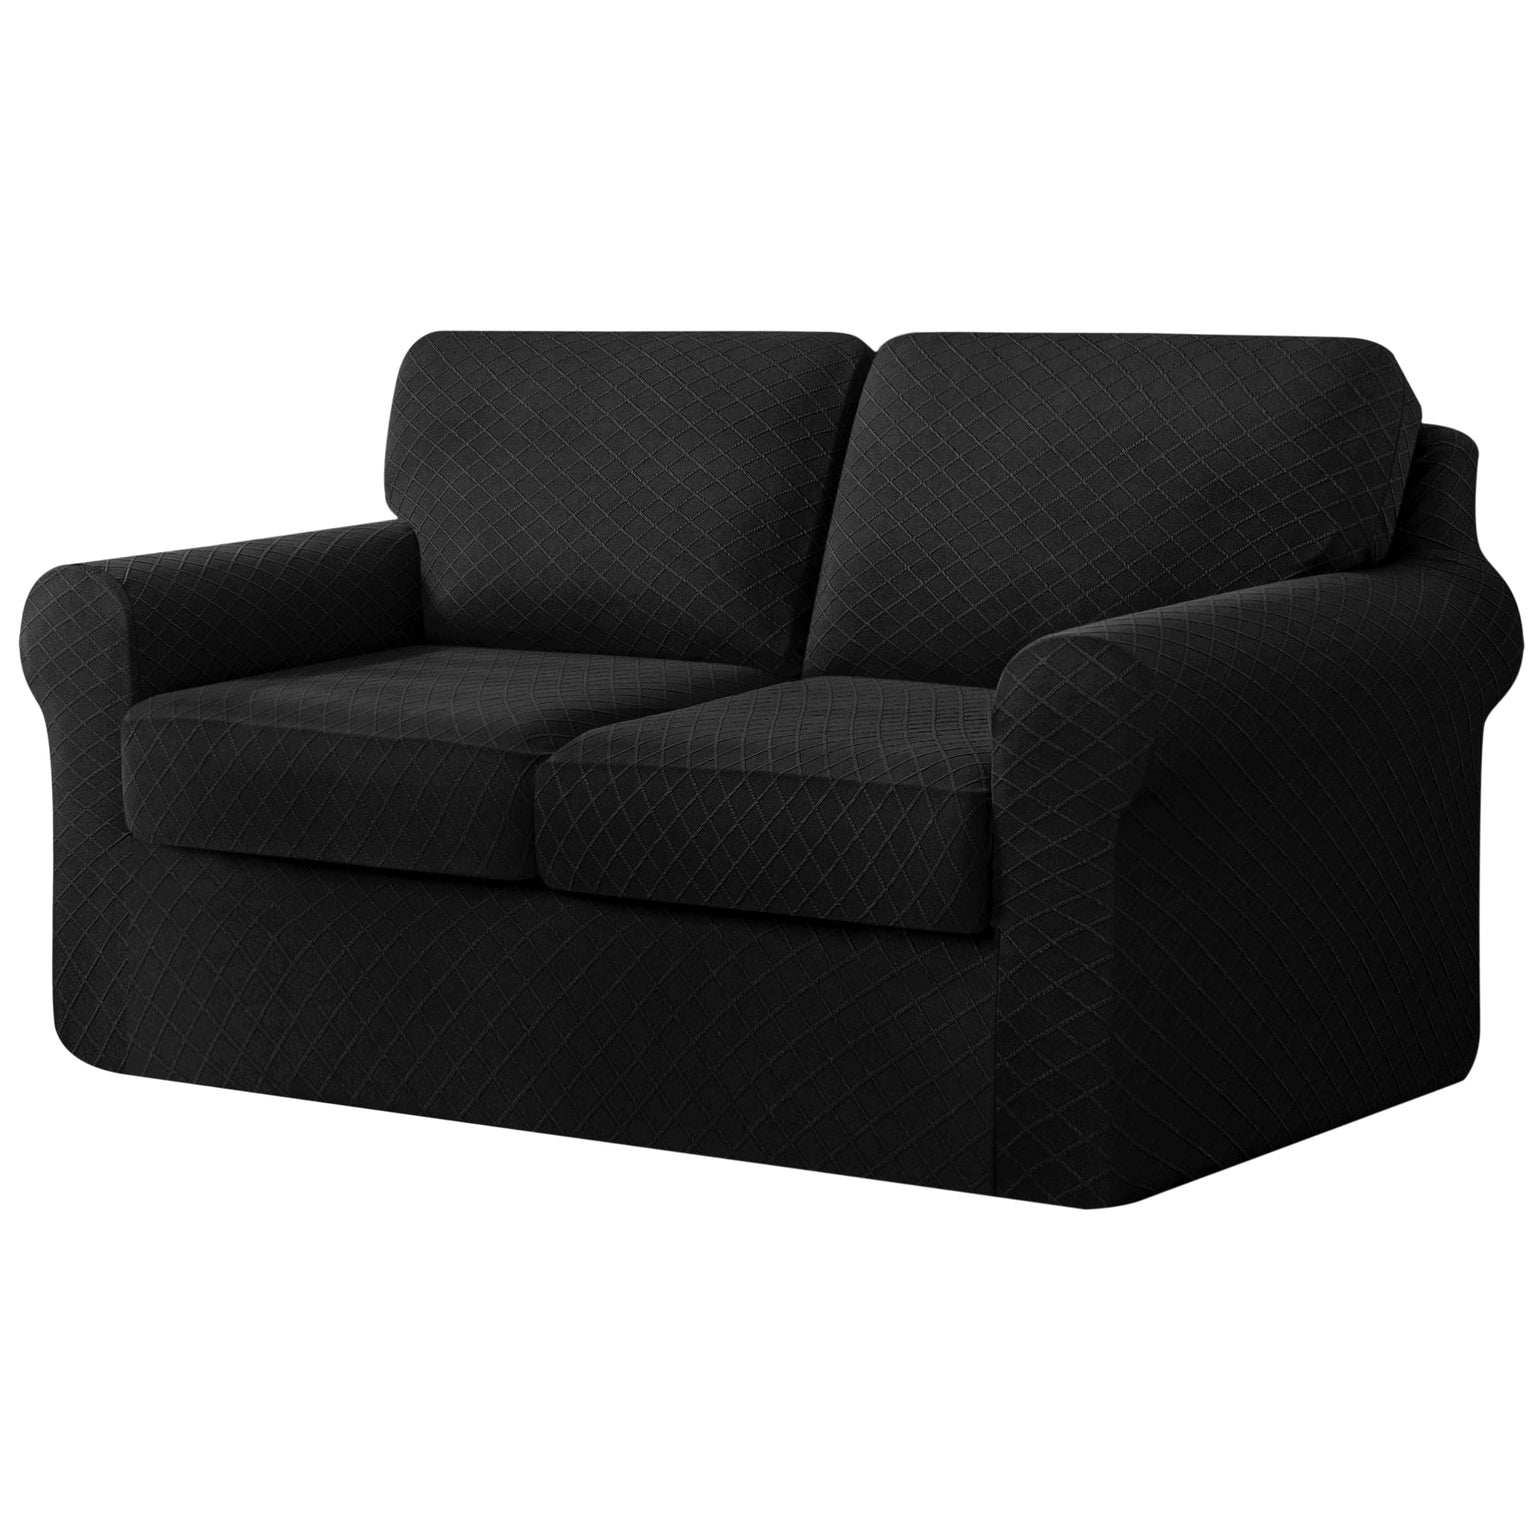 Diamond Lattice Stretch Loveseat Sofa Cover - Seaters Couch Slipcover with Two Separate Backrests and Cushions with Elastic Band, Checks Spandex Rhombus Fabric